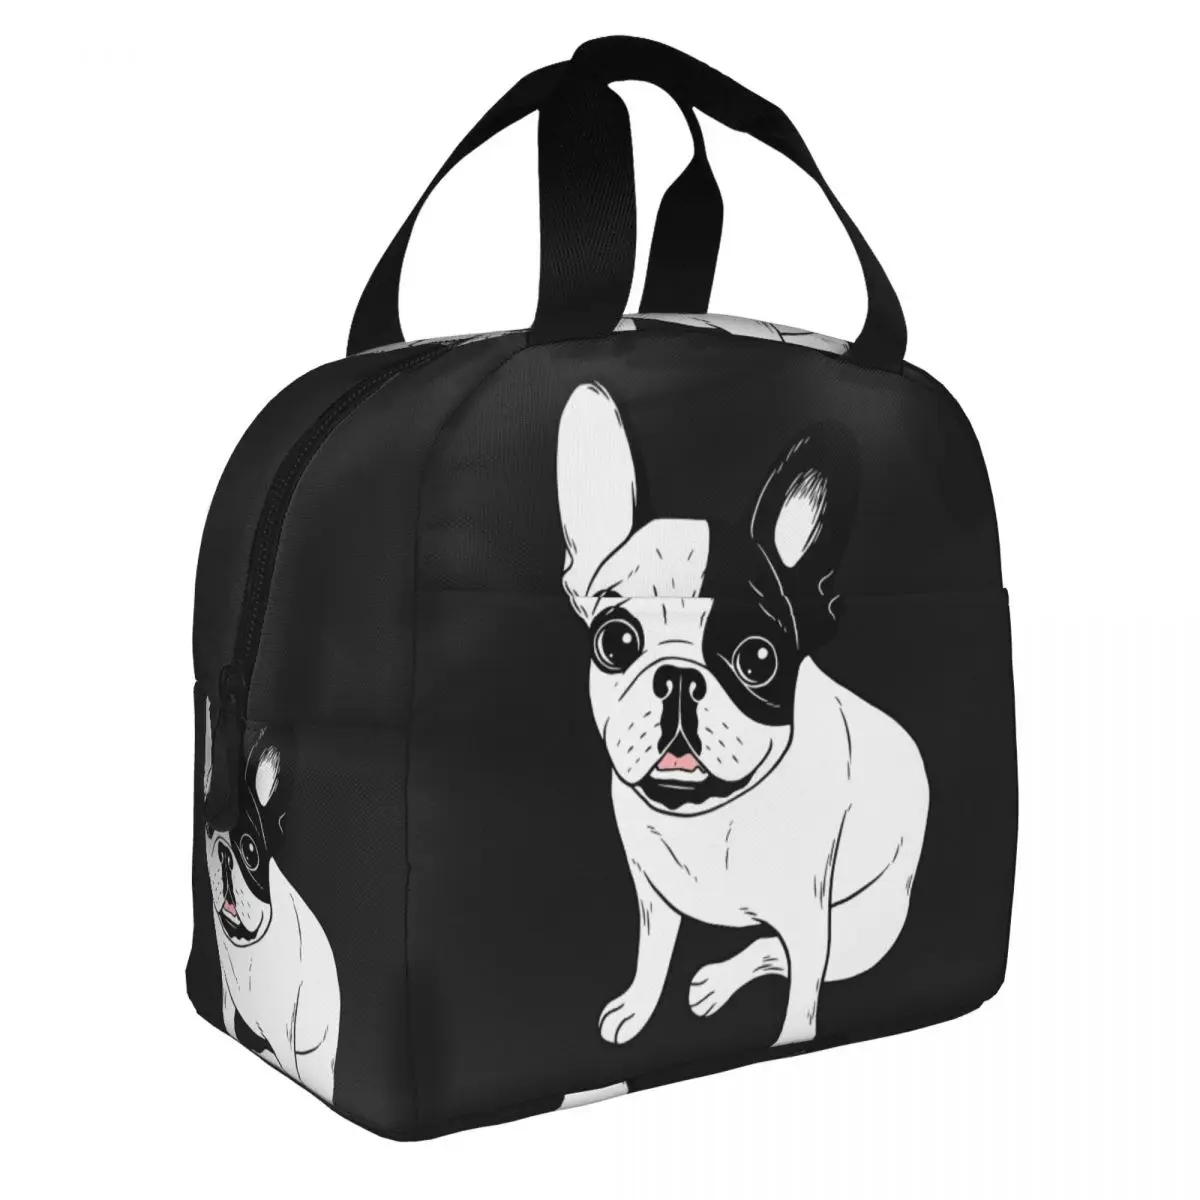 Single Hooded Brindle Pied Frenchie Lunch Bento Bags Portable Aluminum Foil thickened Thermal Cloth Lunch Bag for Women Men Boy